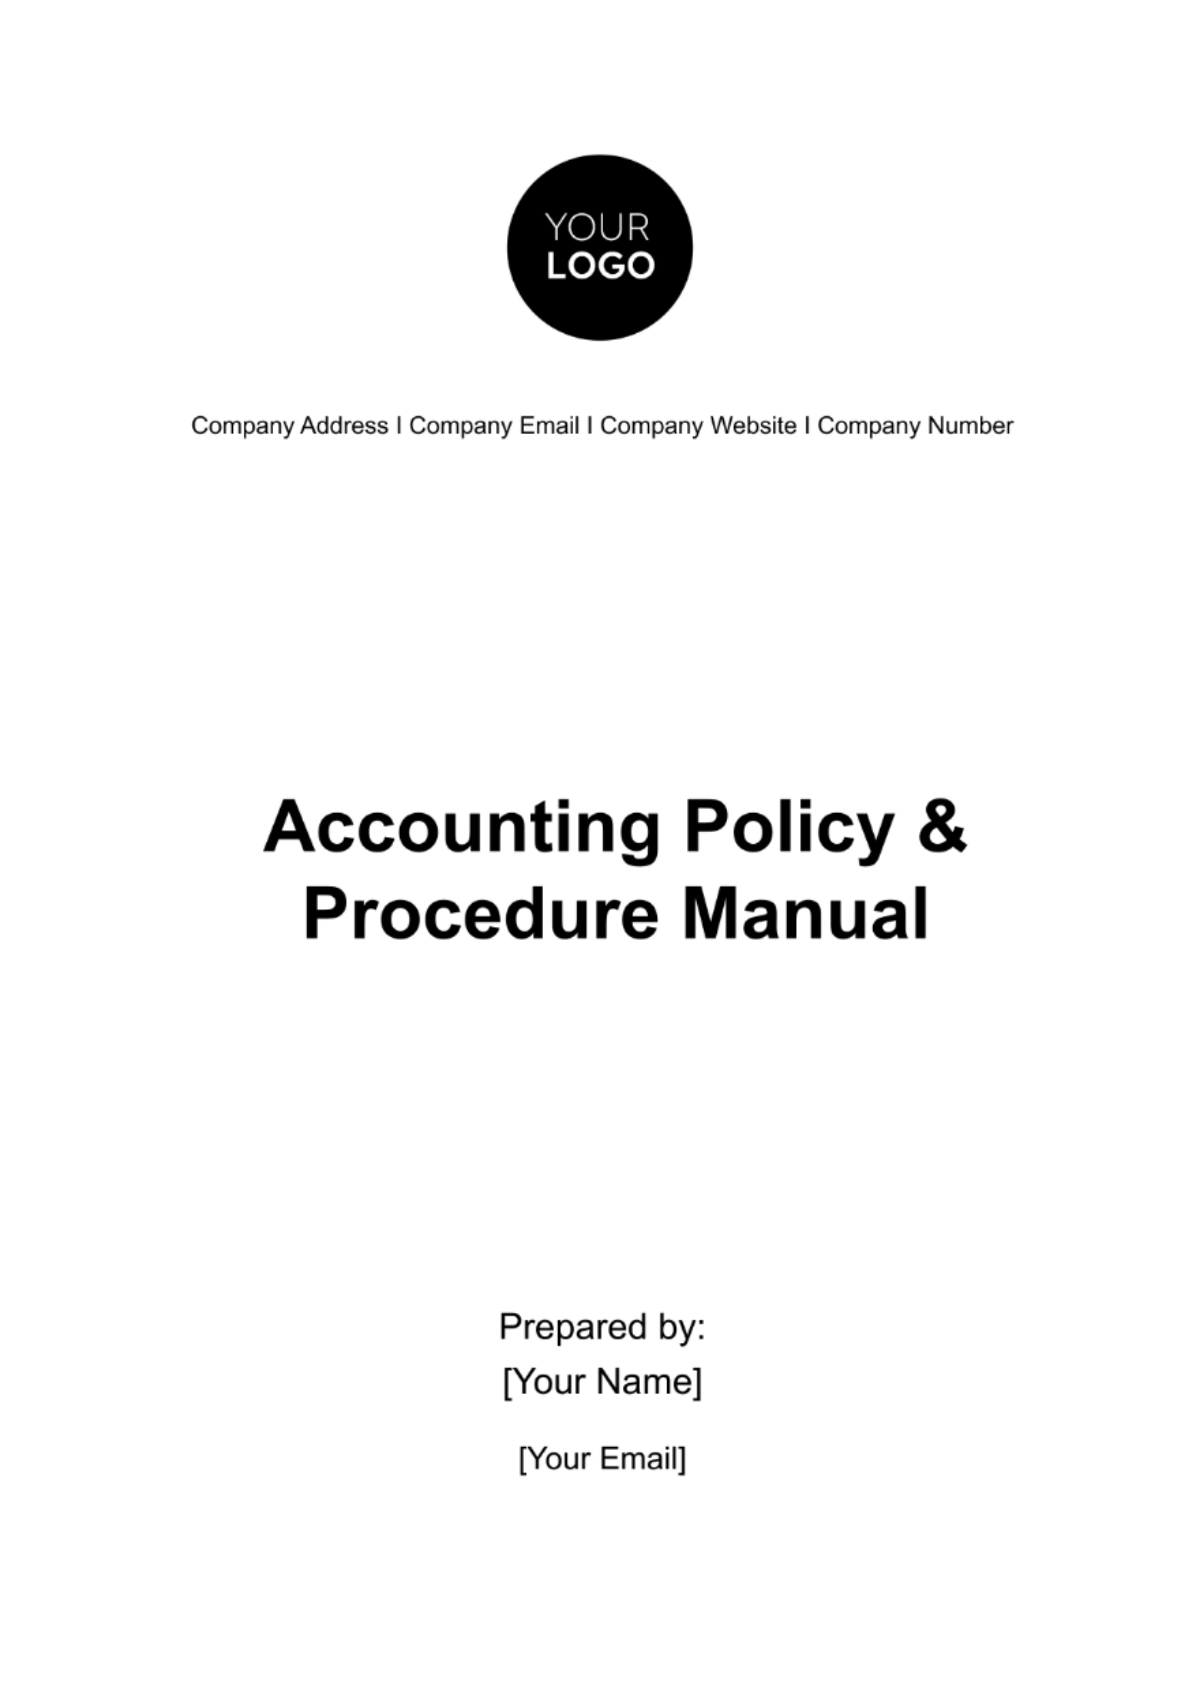 Free Accounting Policy & Procedure Manual Template